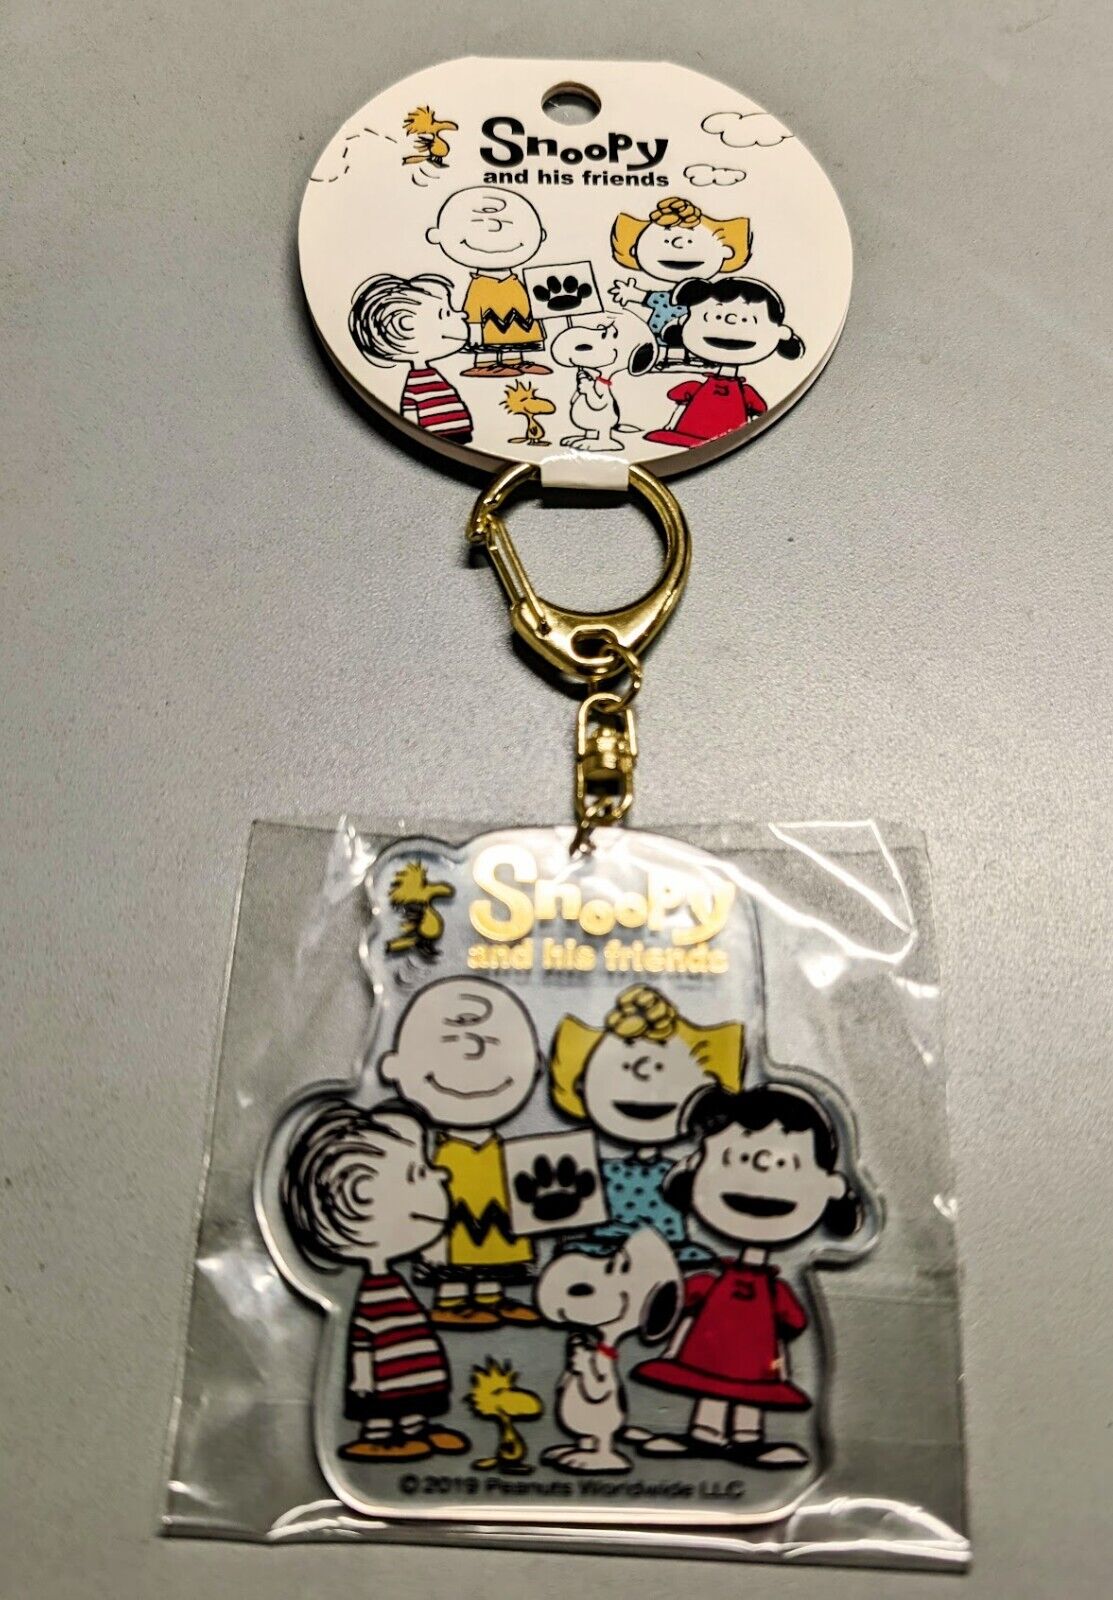 Vintage Peanuts Snoopy and his friends Keychain Japan